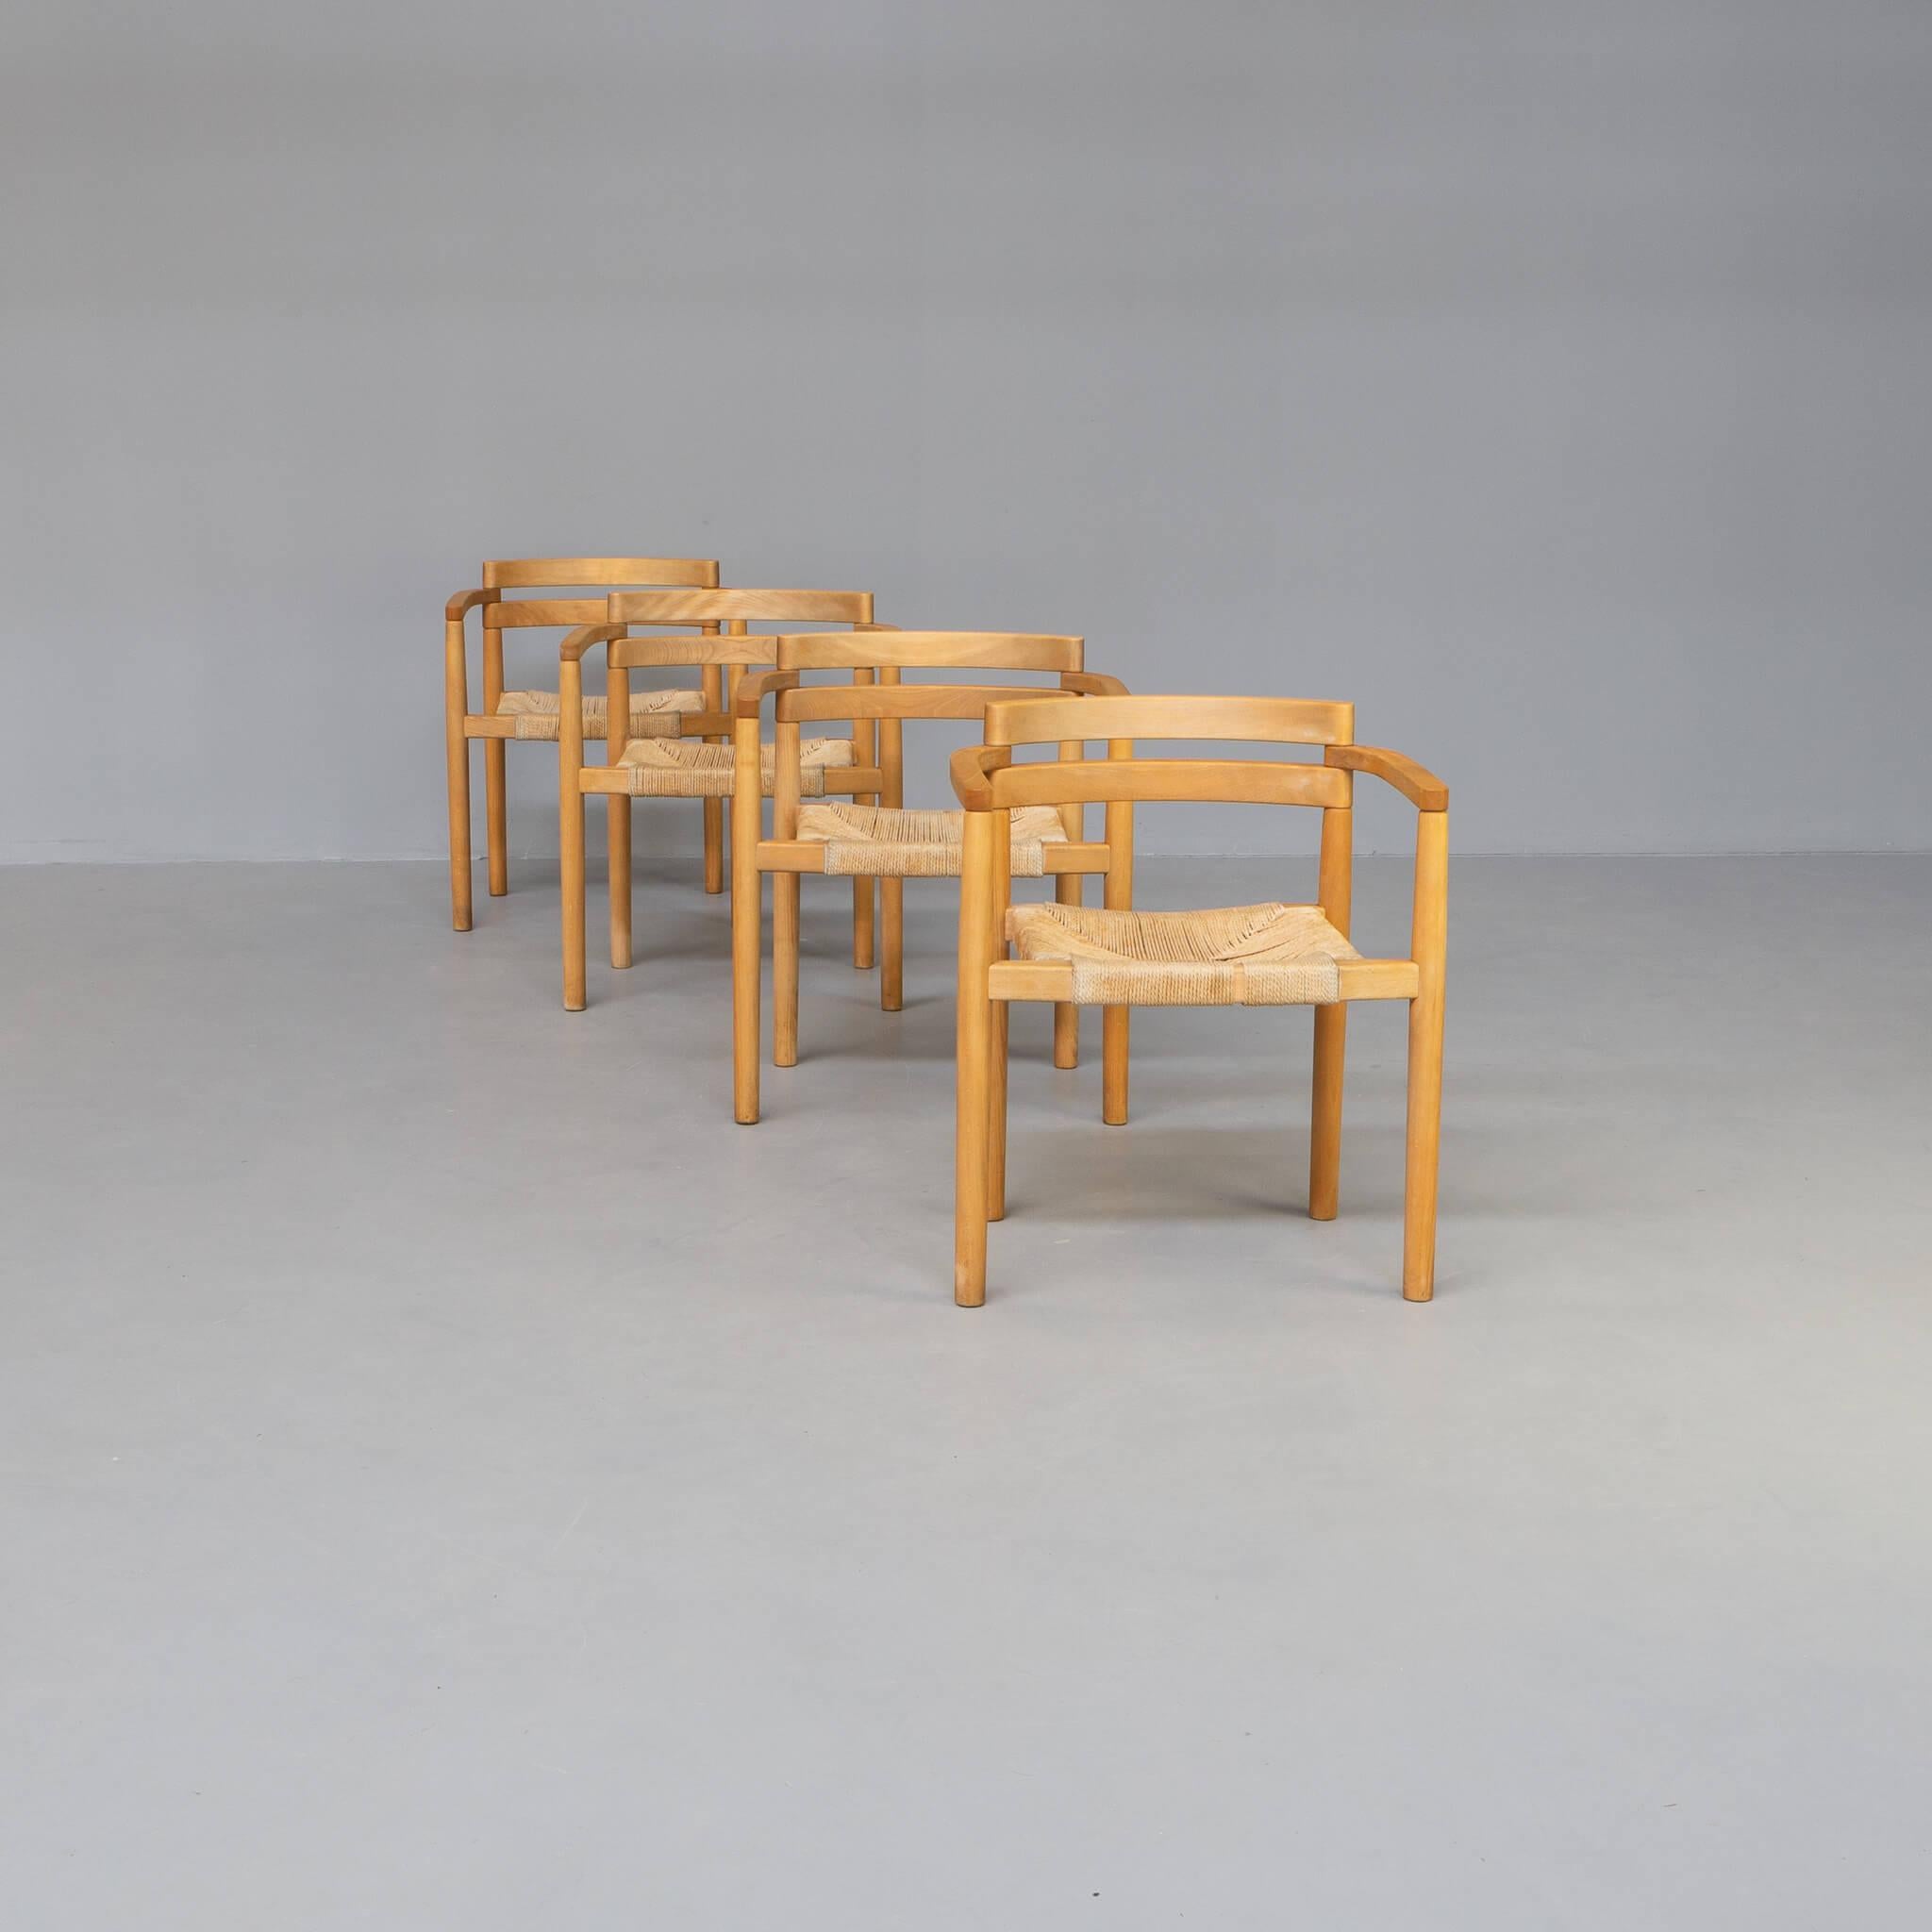 Danish top designers like Hans J. Wegner or Borge Mogensens preferred to work with pure craftsmen and often choose to design their furnitures in small workshops or small factories. Just because of the craftmenship and because of the wish to produce